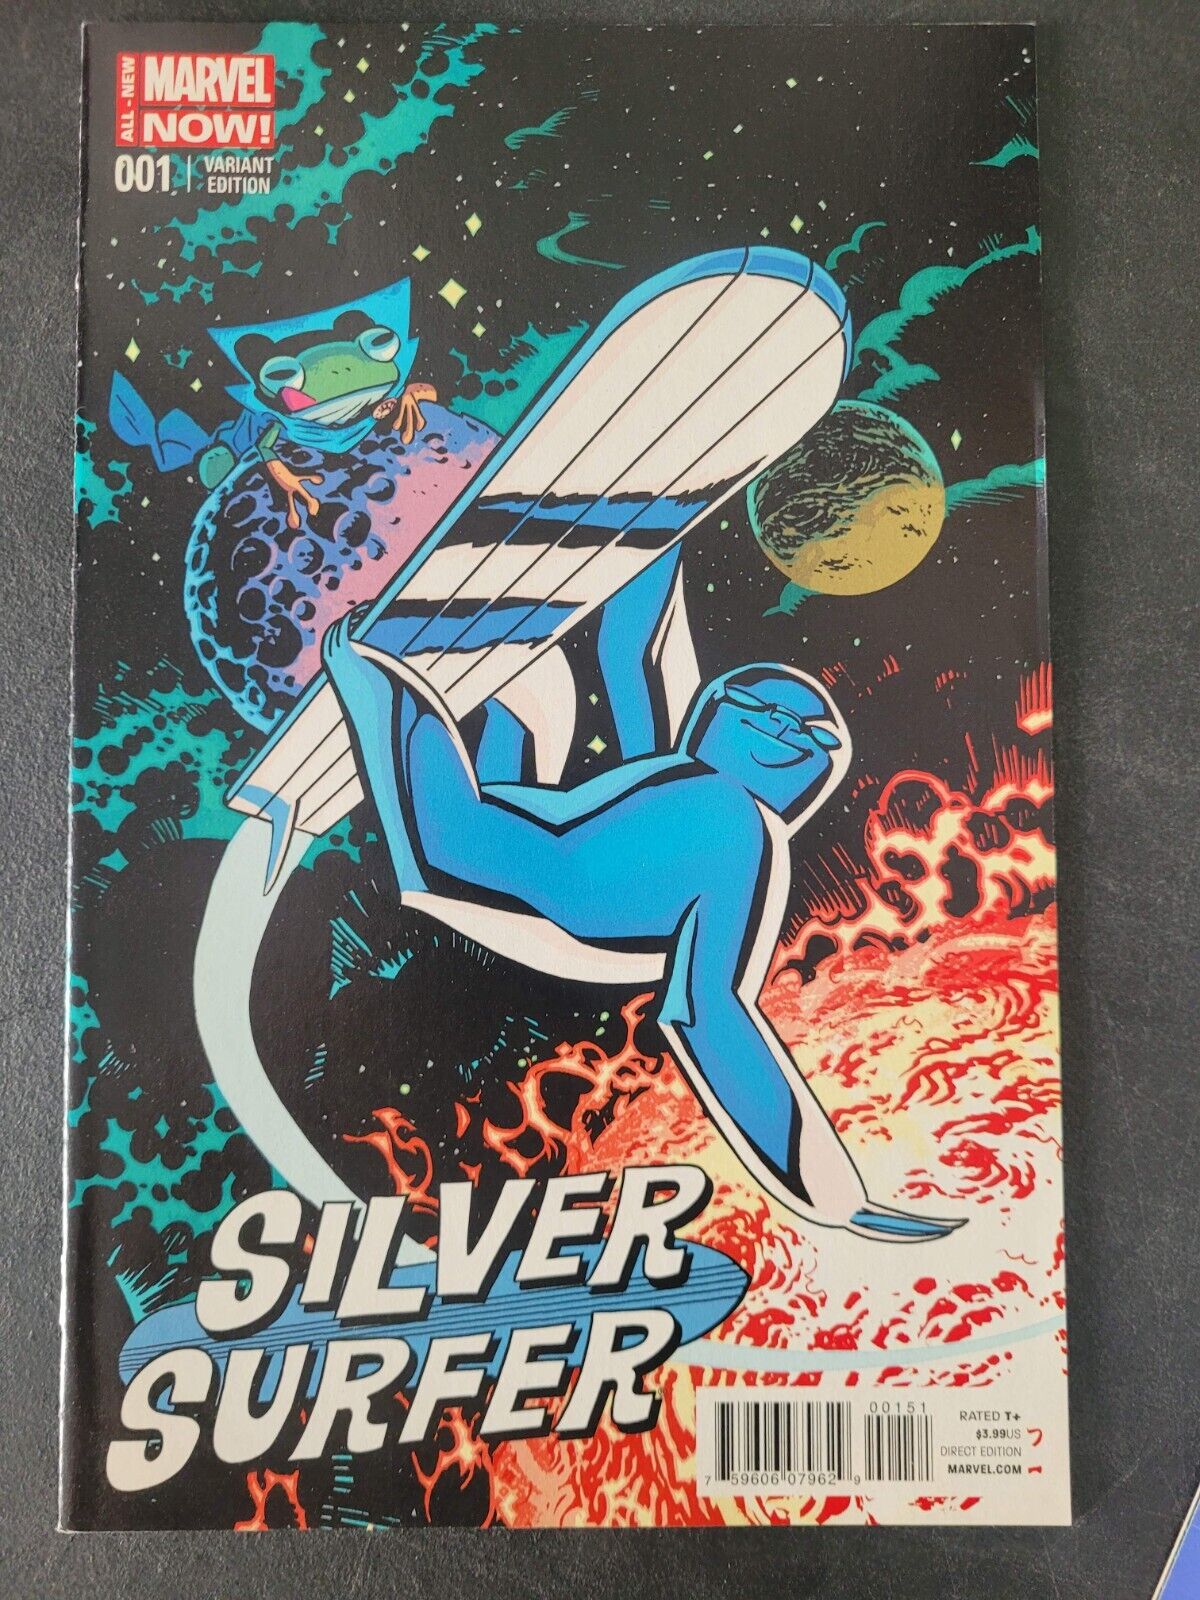 SILVER SURFER #1 (2014) ALL-NEW MARVEL NOW COMICS SLOTH ANIMAL VARIANT COVER